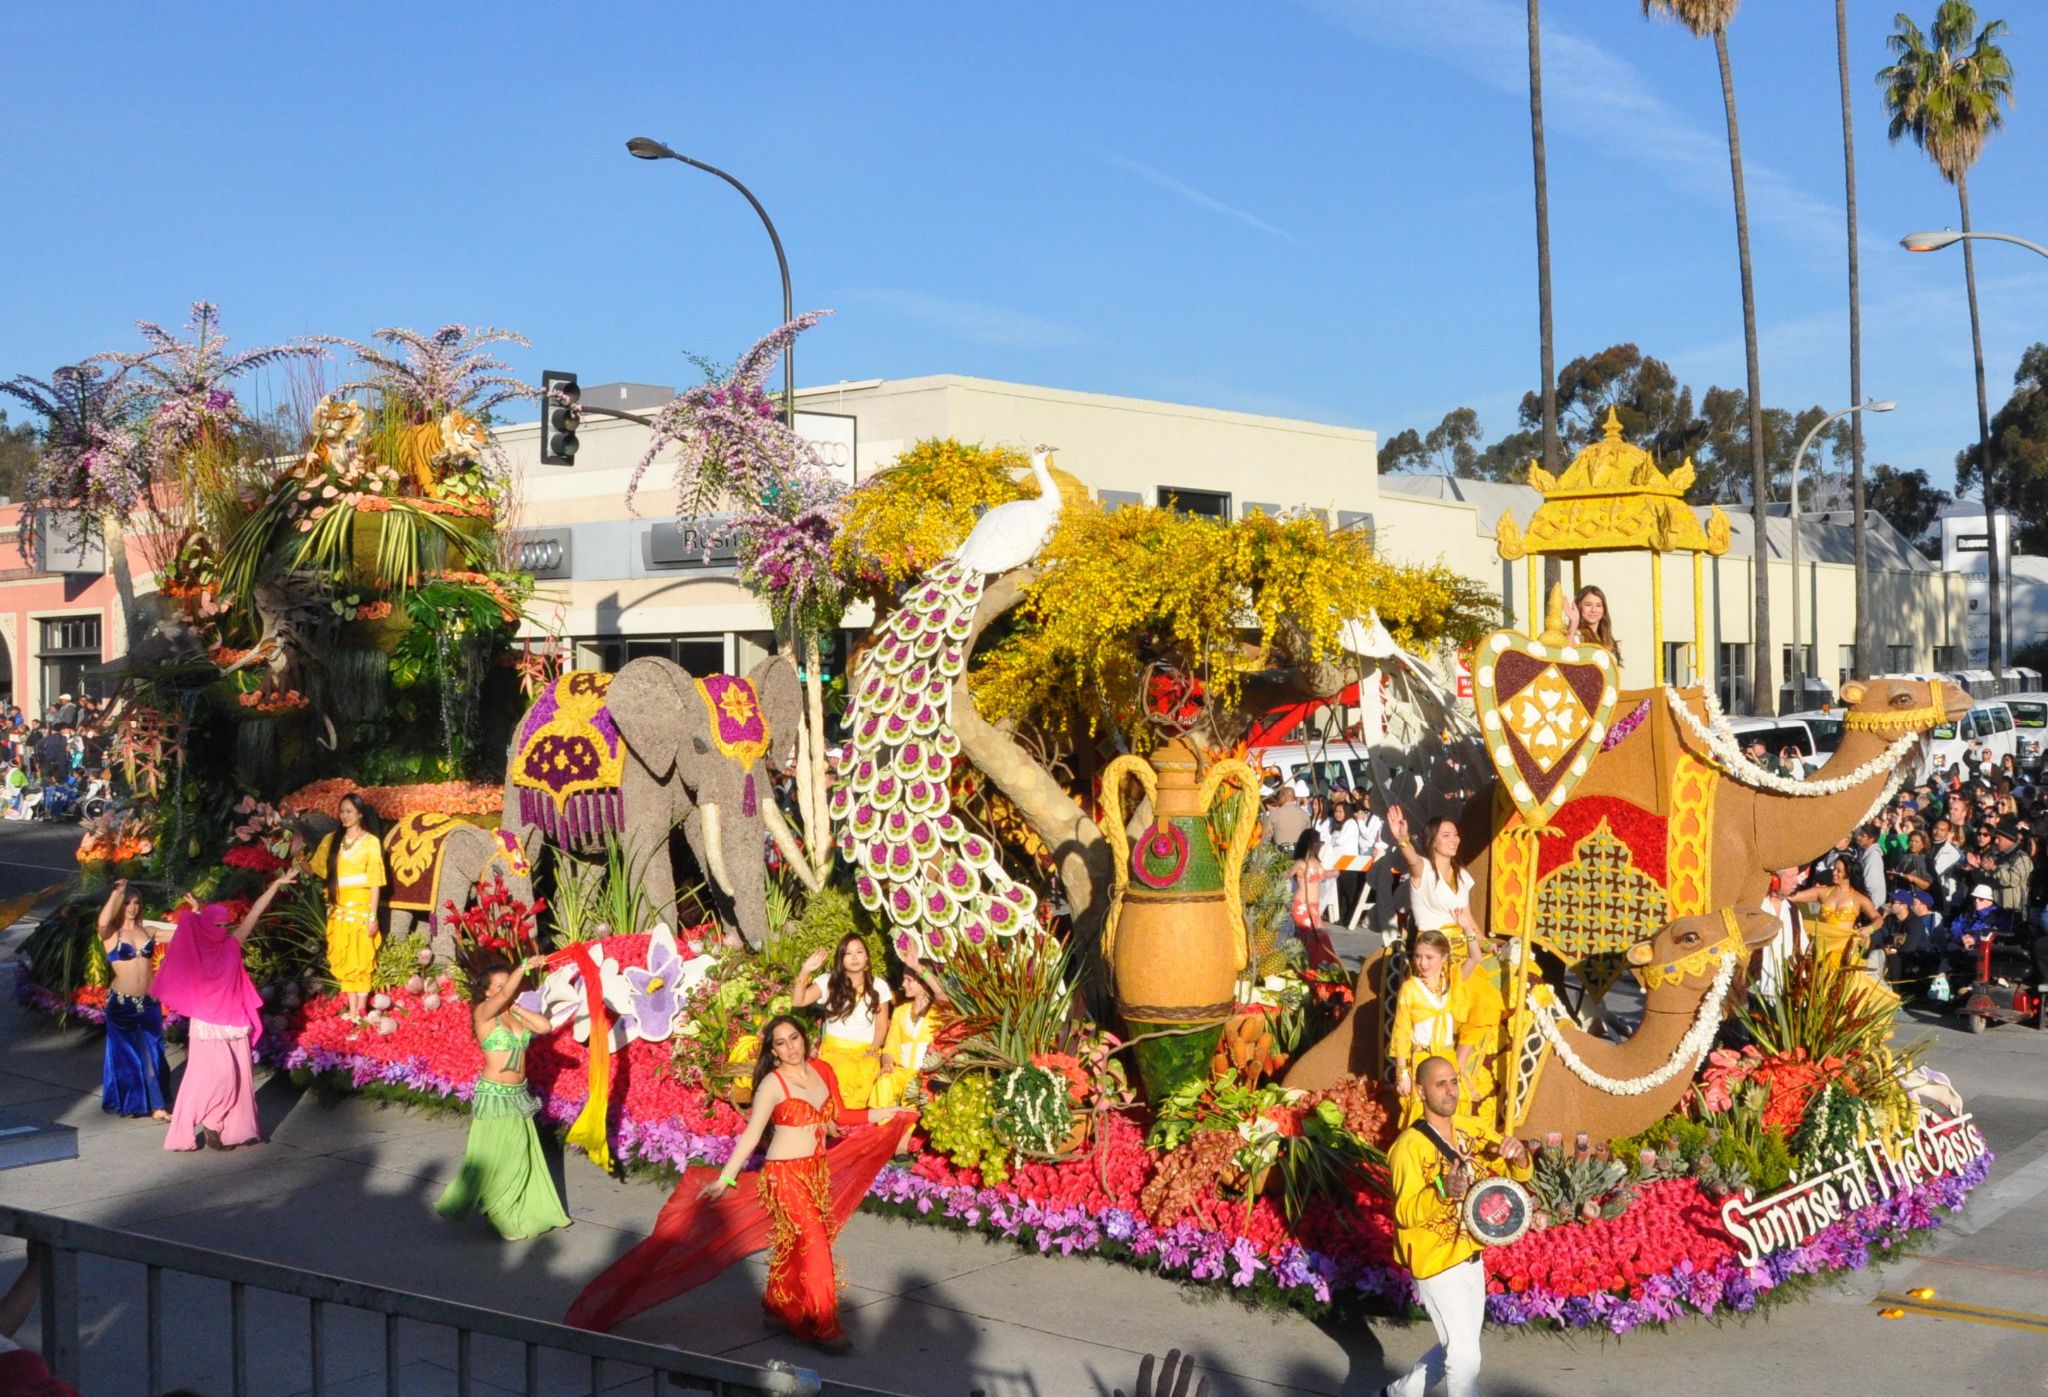 Dole Packaged Foods - Sunrise at the Oasis (a), Tournament of Roses Parade, Pasadena, CA - 2014-01-01